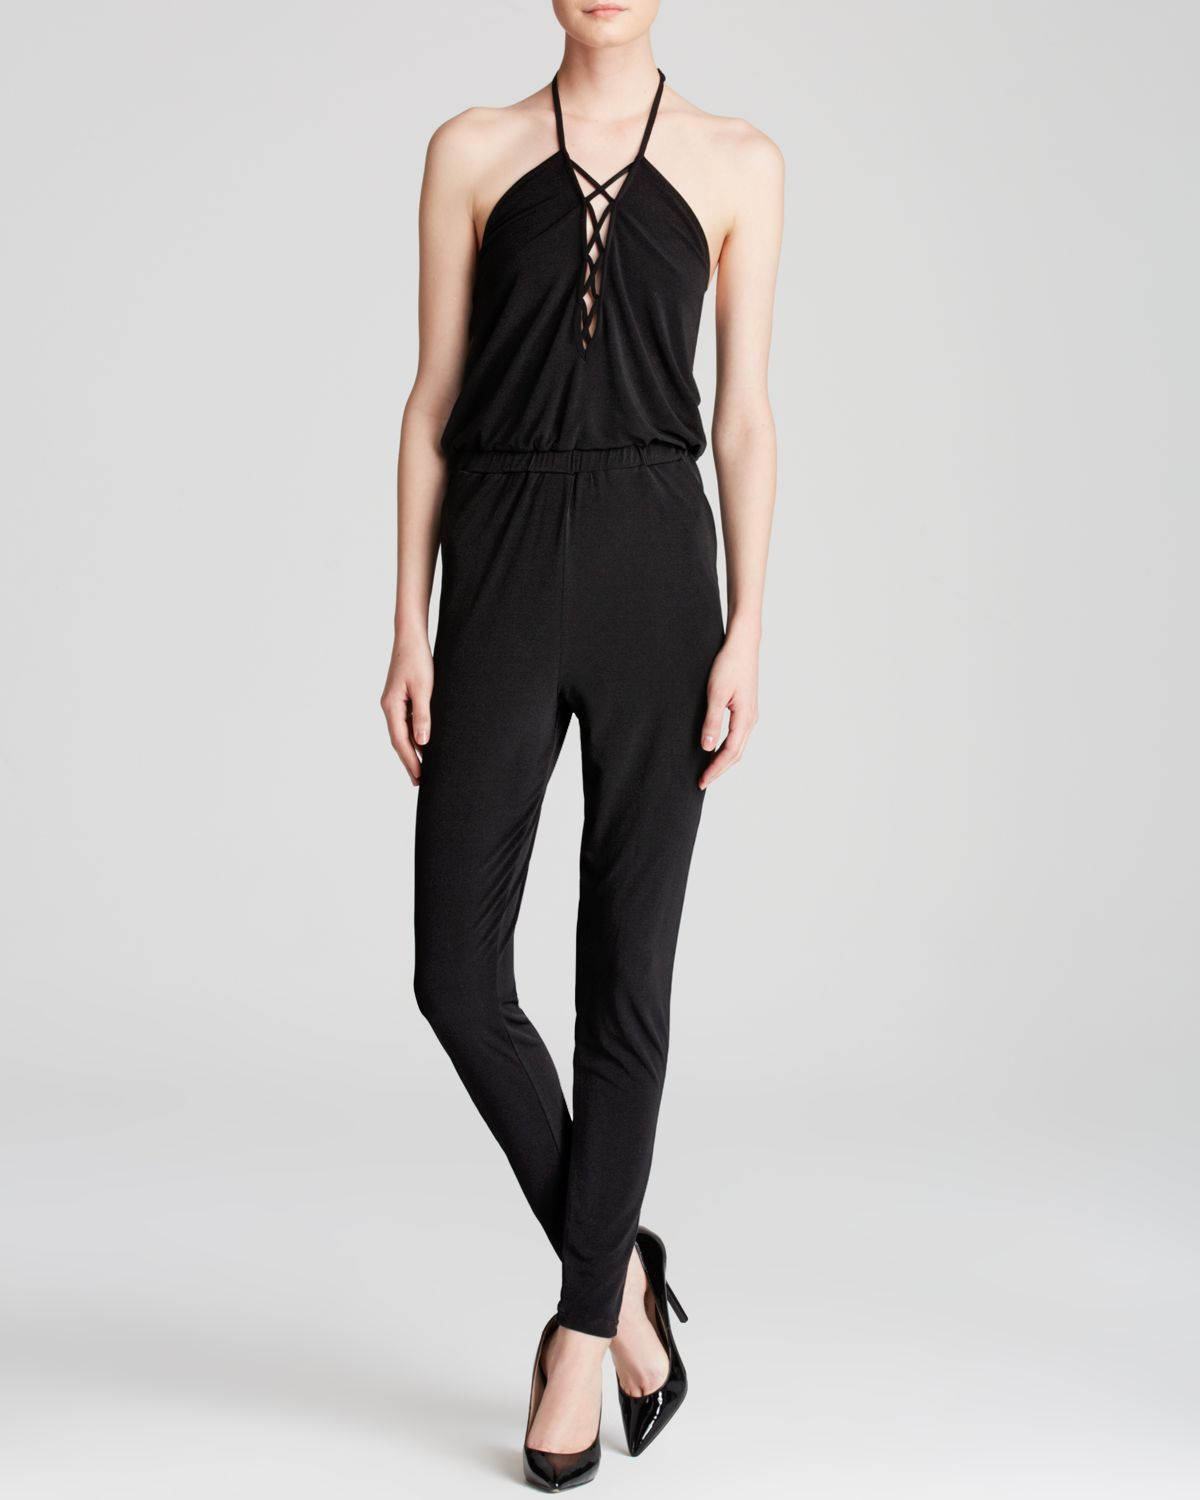 Guess Lace Up Halter Jumpsuit in Black | Lyst